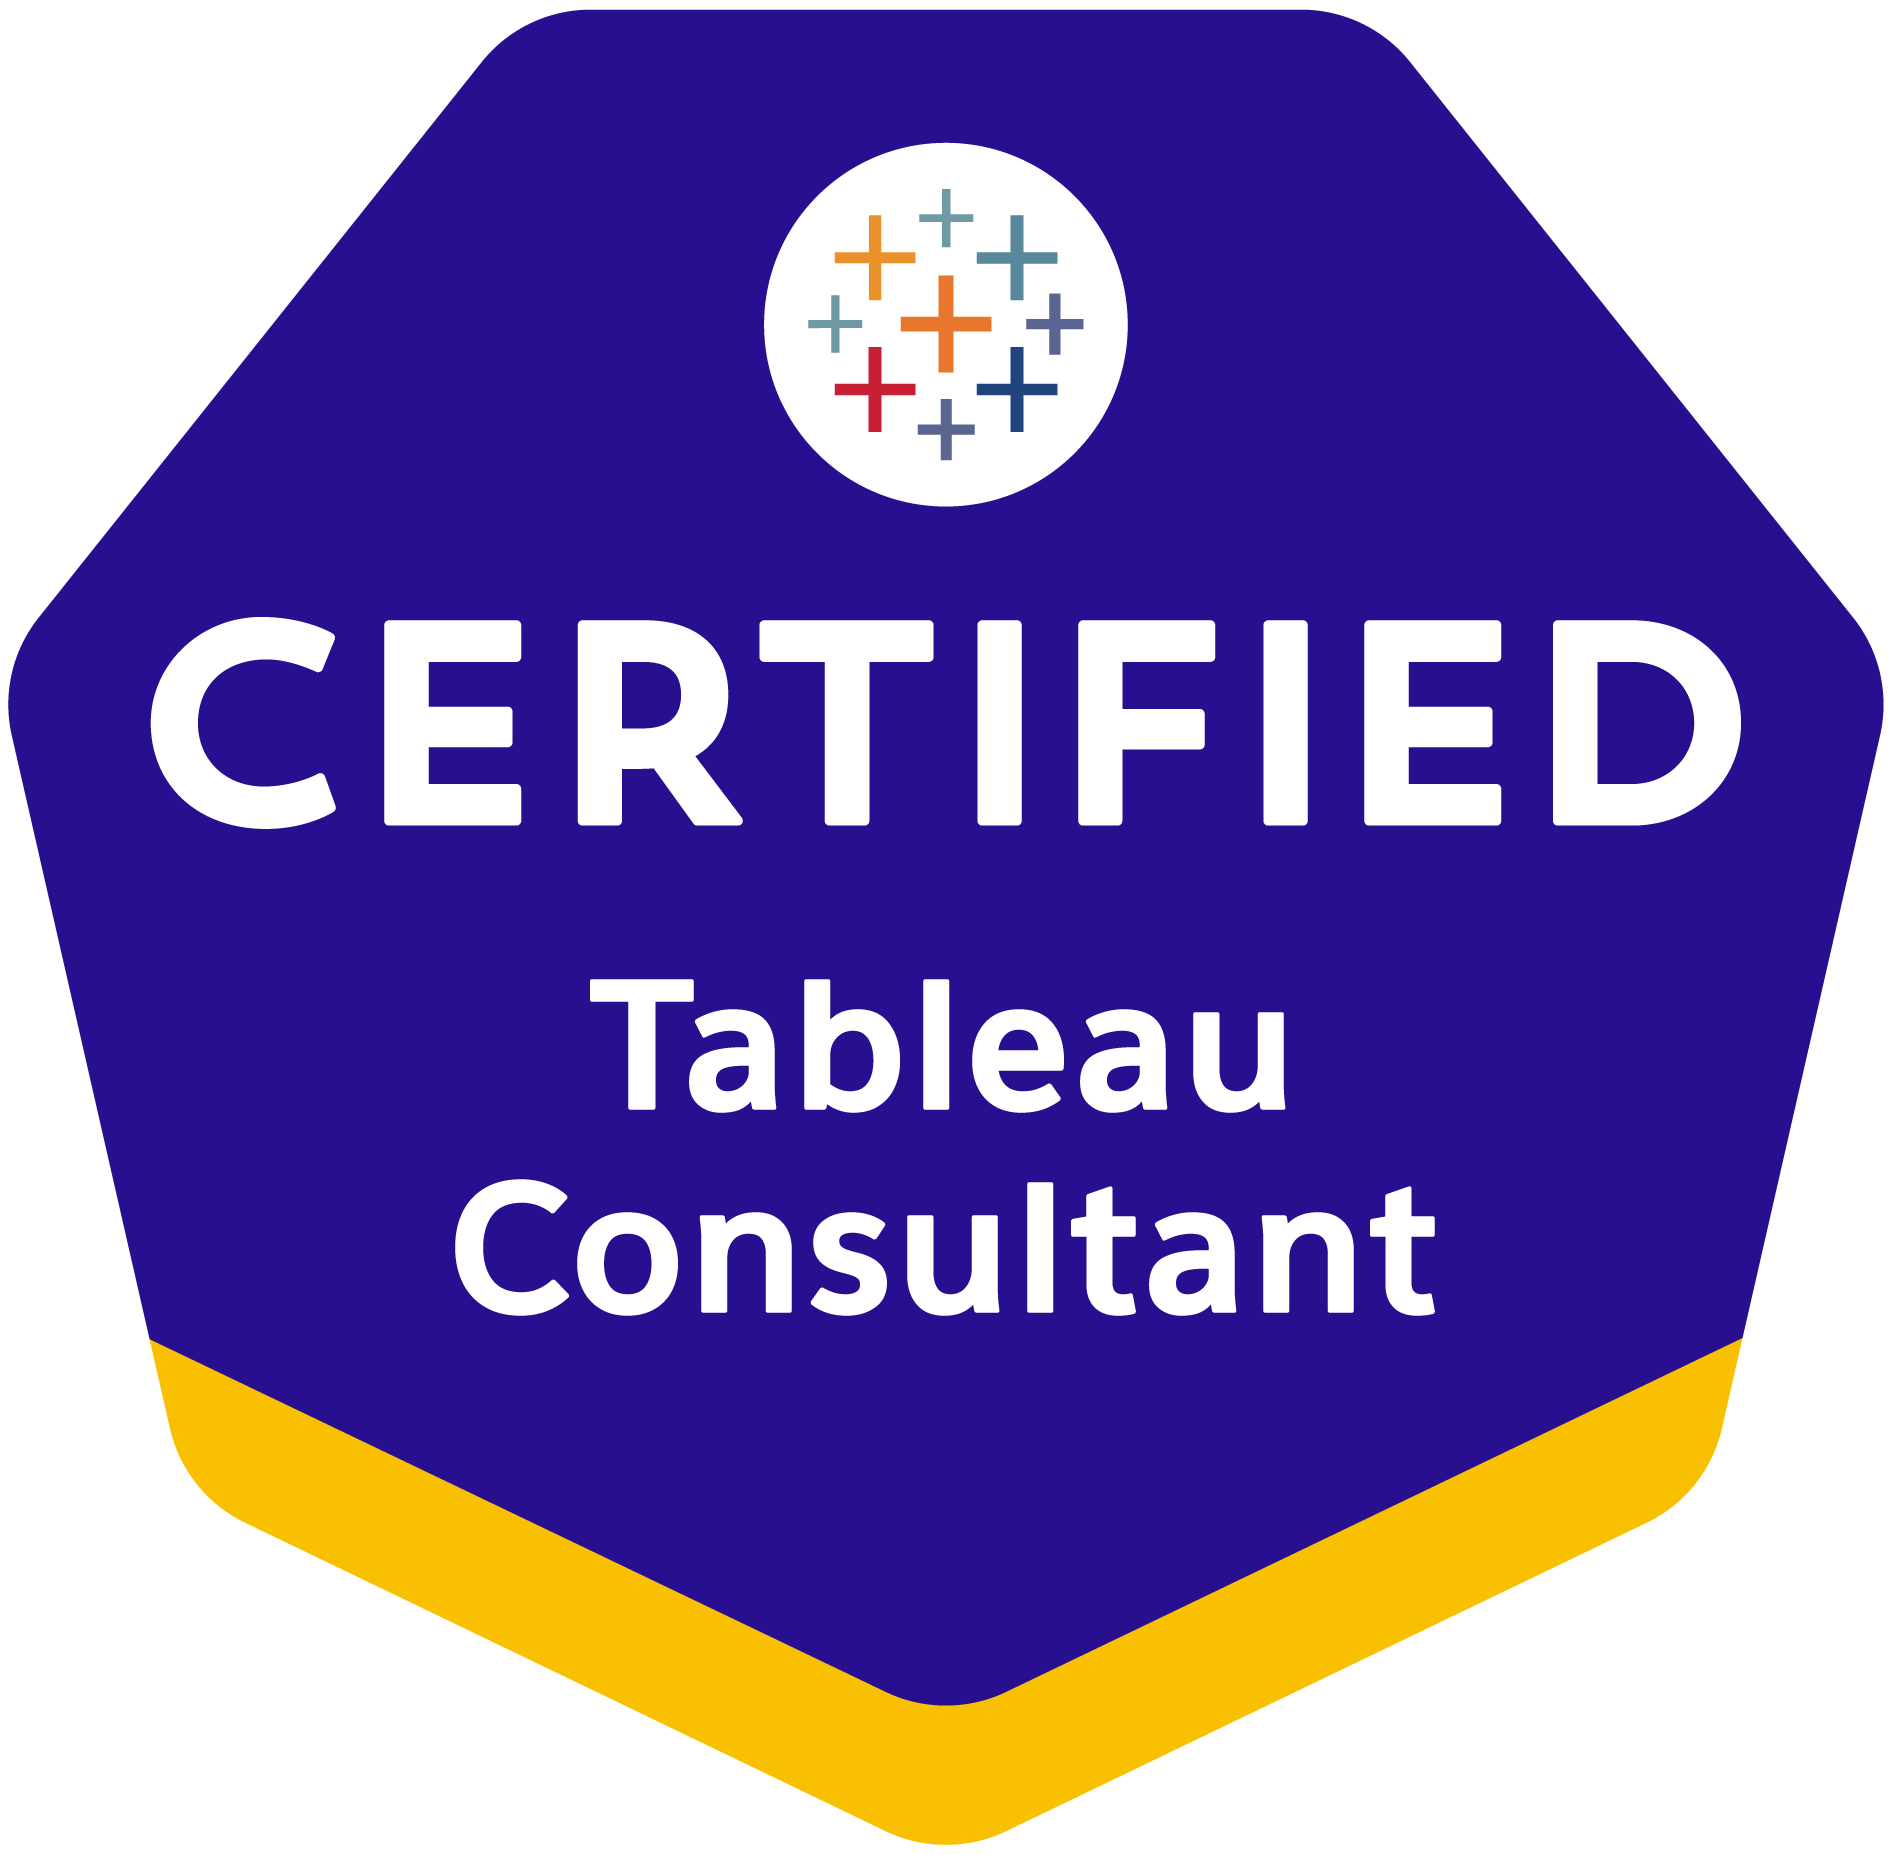 Tableau Certified Consultant